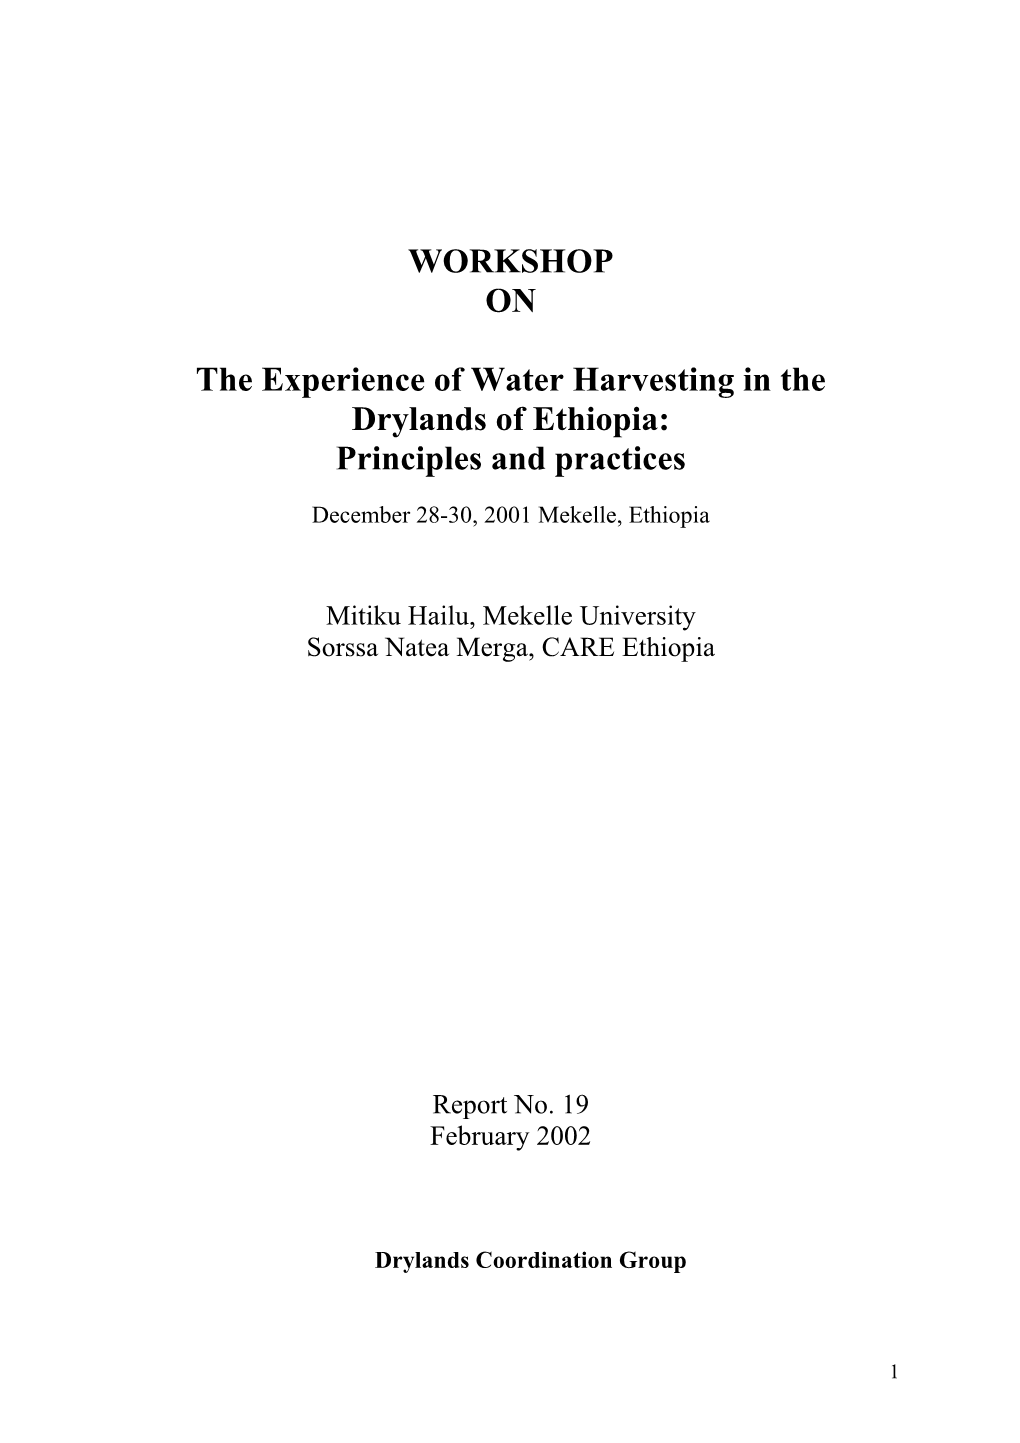 WORKSHOP on the Experience of Water Harvesting in the Drylands Of